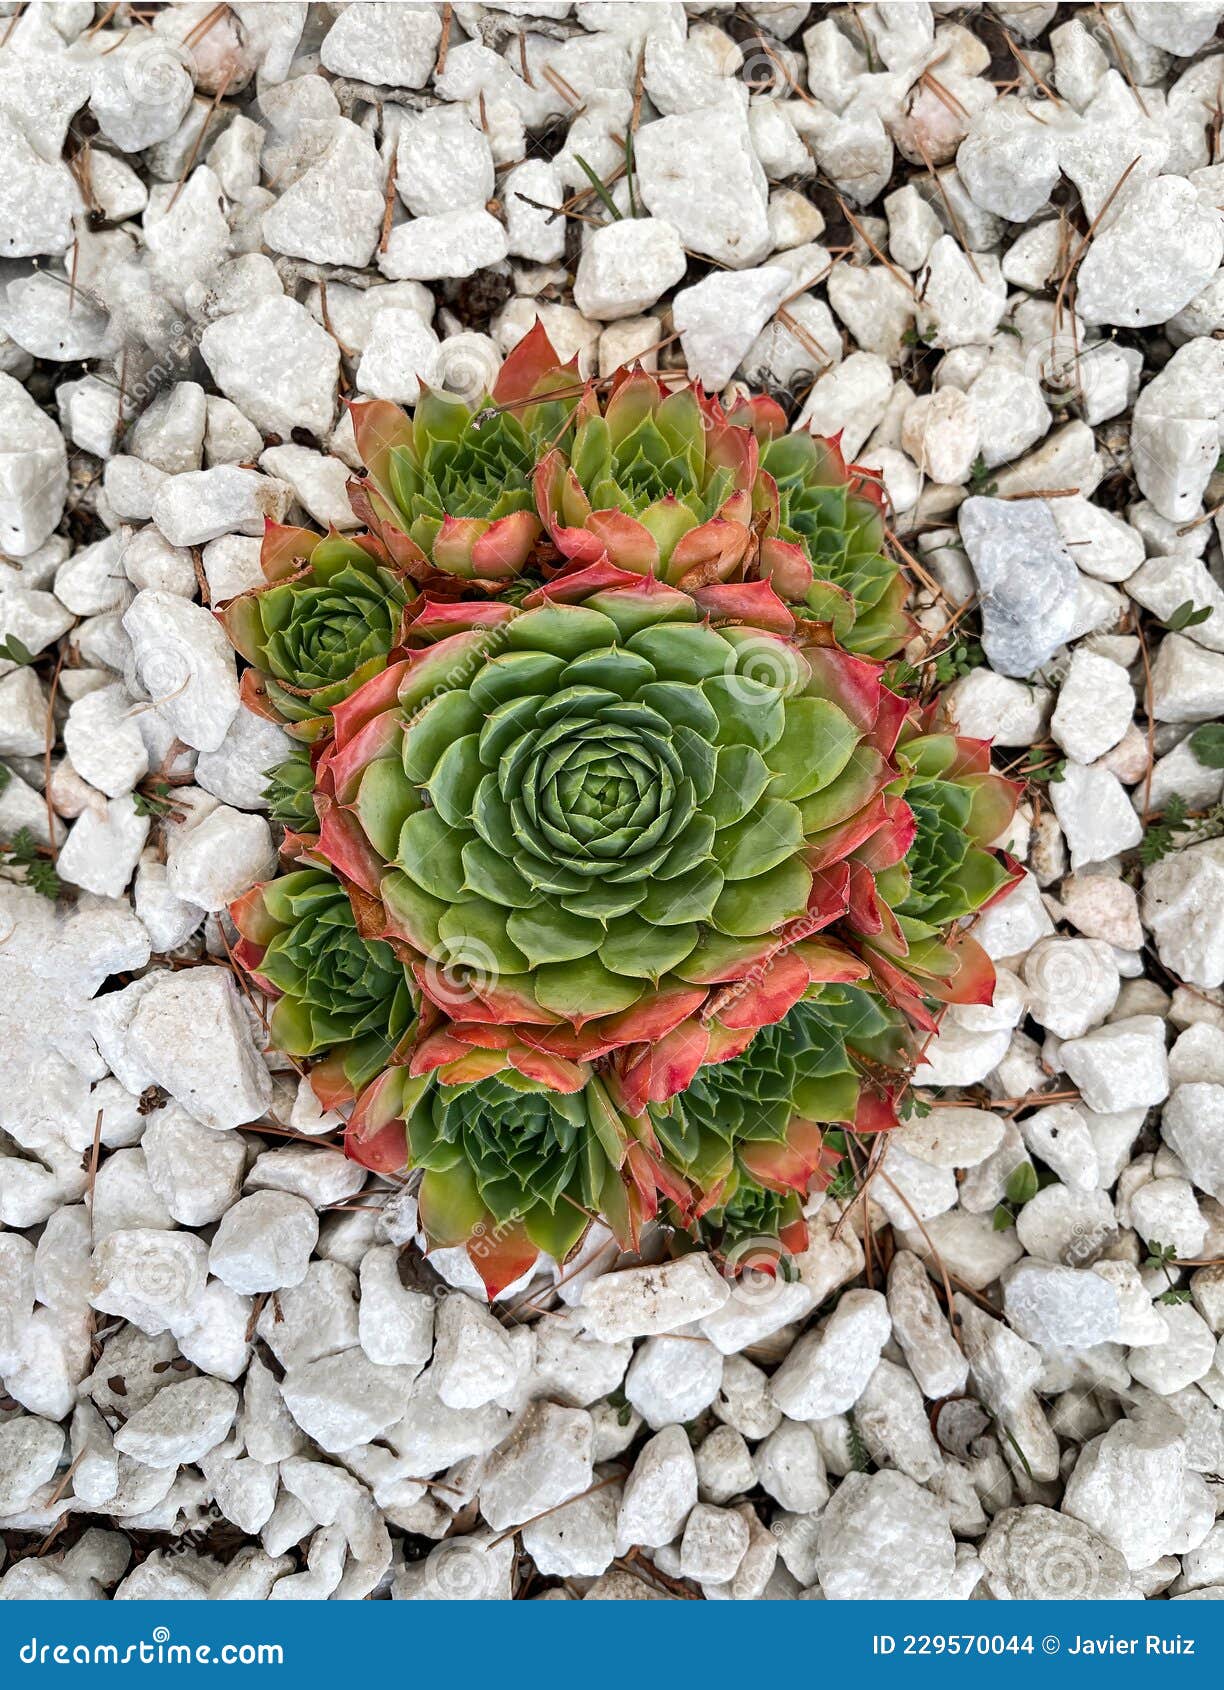 zenithal view of a sempervivum plant forming a symmetrical circle surrounded by white gravel